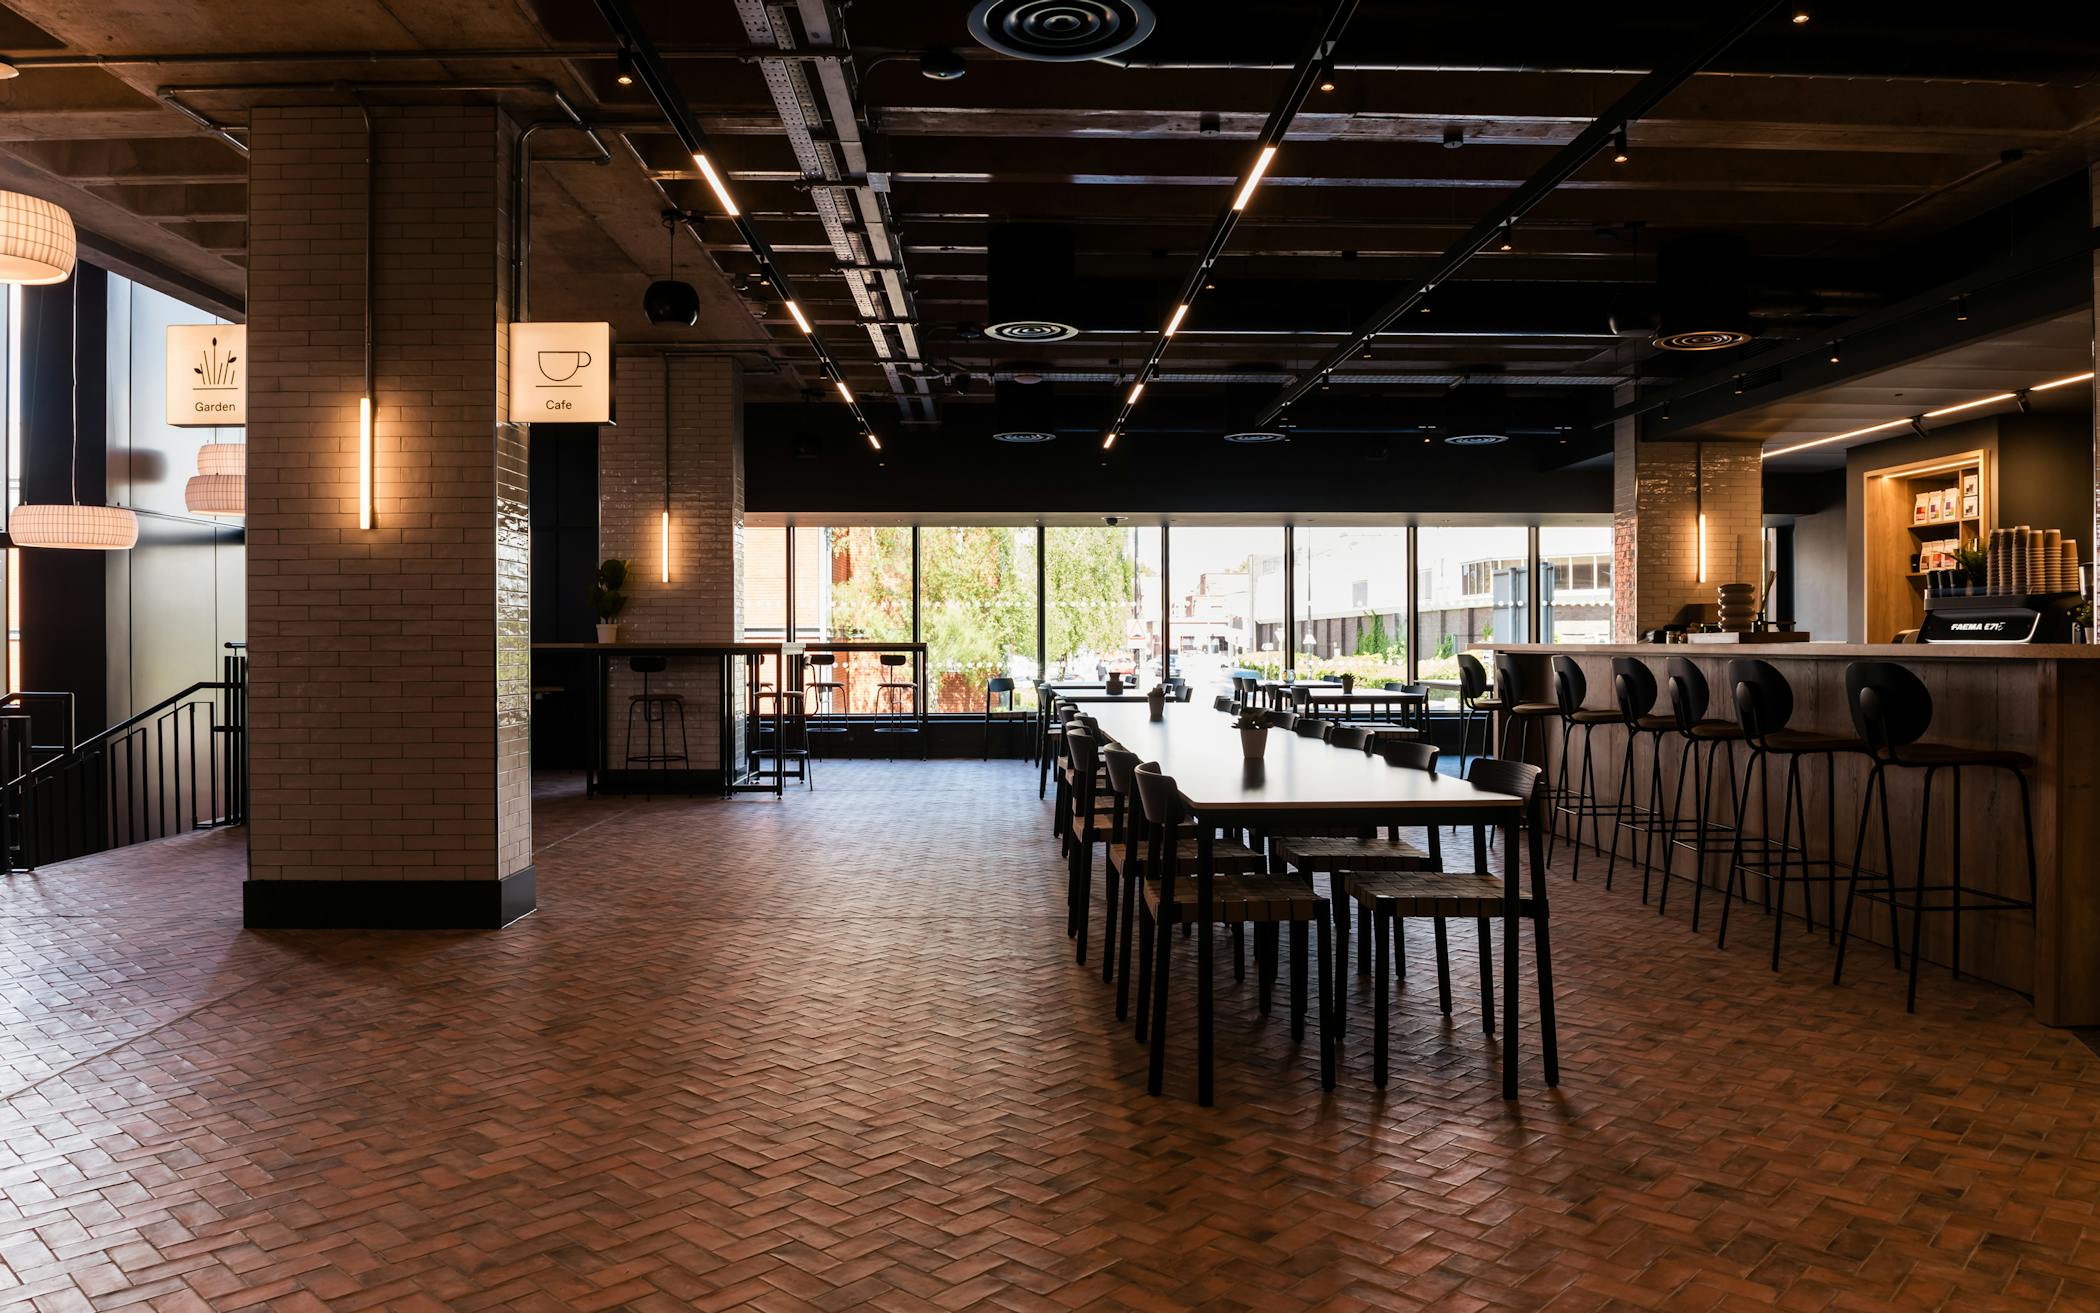 Wide shot of the cafe, showing a long table with chairs, bar seating, parquet floor and tiled pillars.